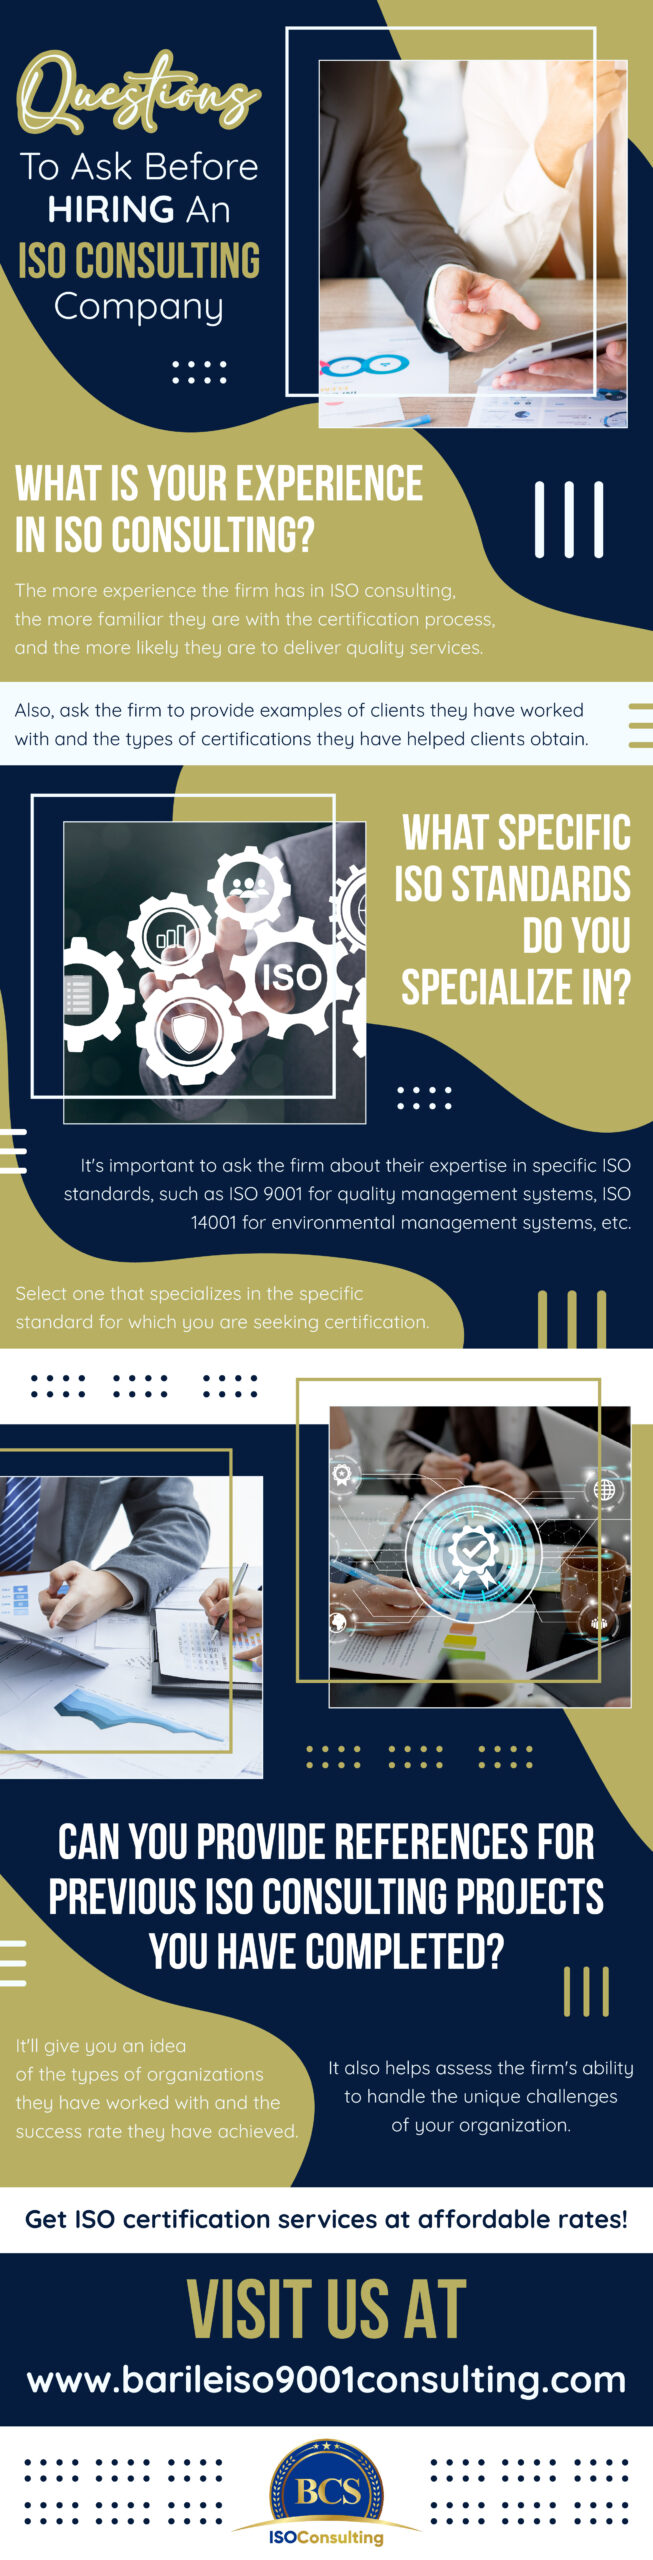 Questions To Ask Before Hiring An ISO Consulting Company - Infograph